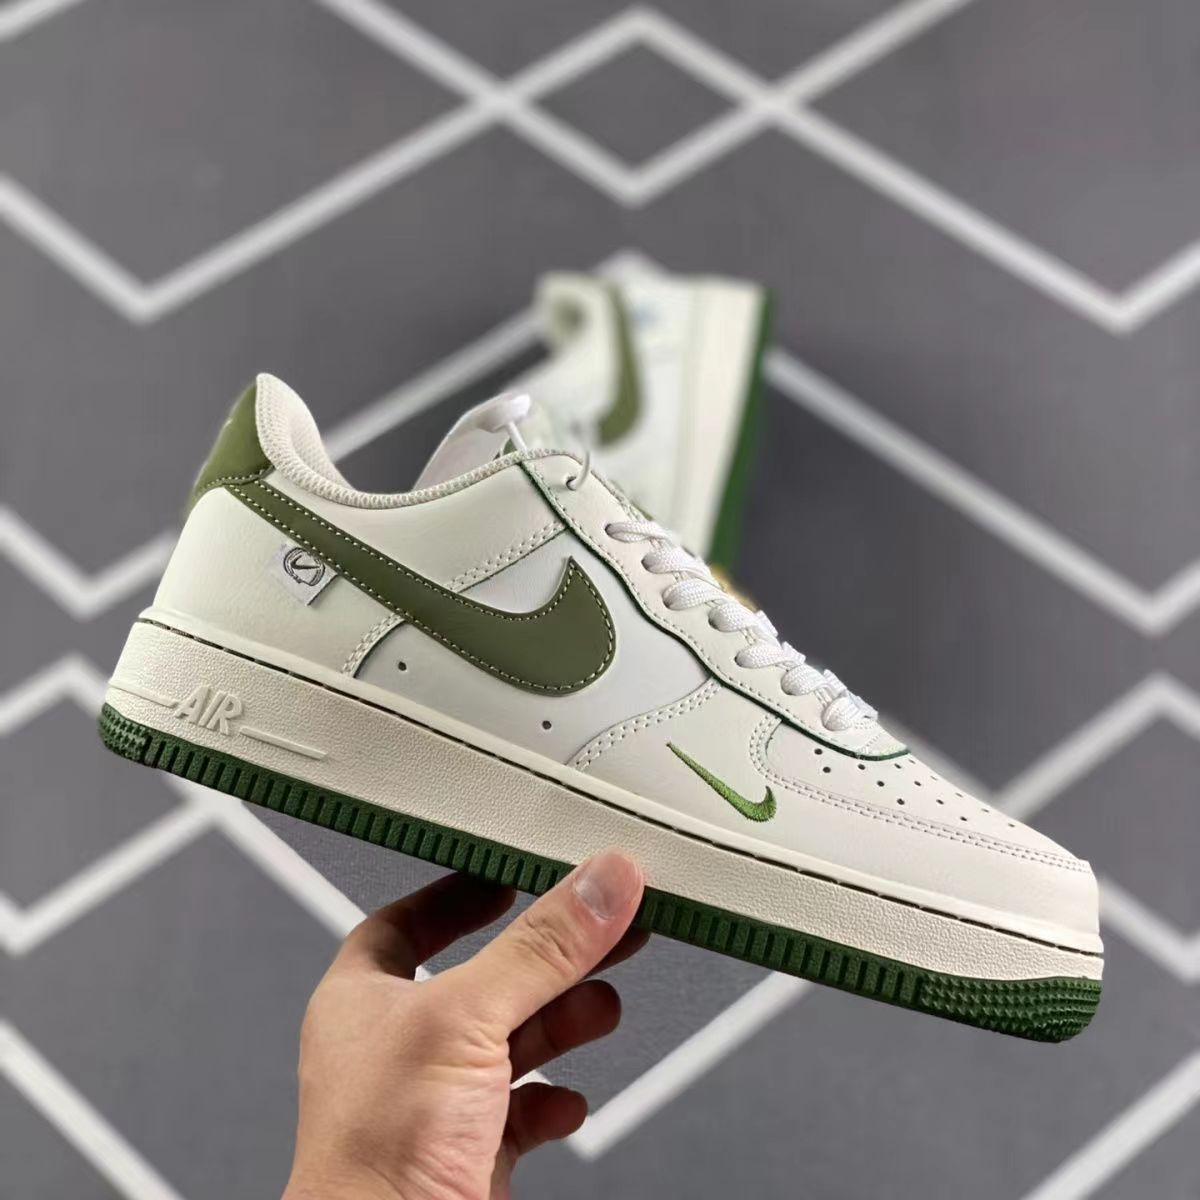 Air Force 1 low Olive green fashion retro sneakers running shoes for men women | PH